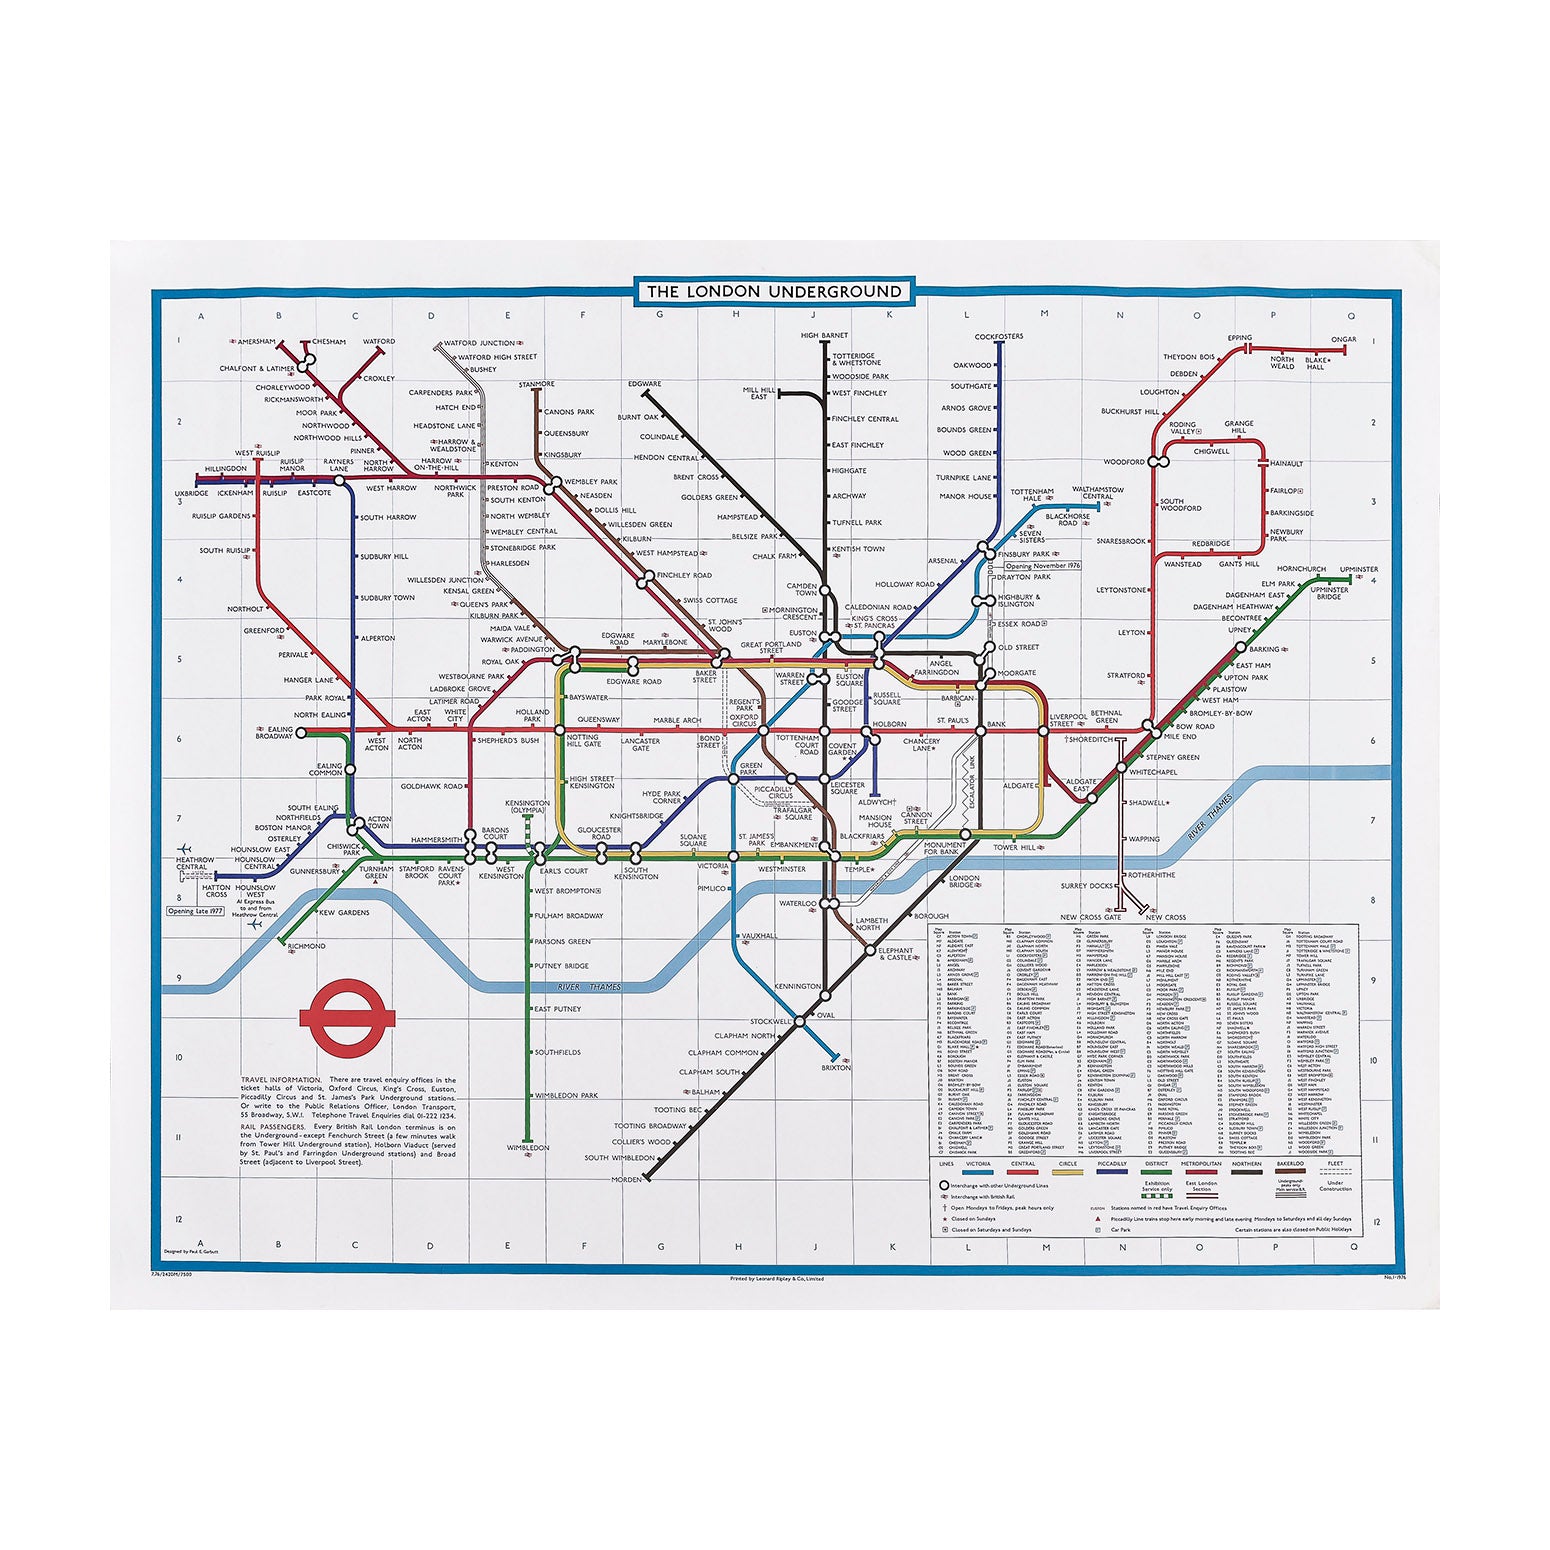 Original station poster map version of the famous London Underground Tube diagram, 1976. The map shows the entire Tube map, with the Piccadilly extension to Heathrow as 'opening late 1977' and the first stage of the "Fleet" Line (later renamed the ‘Jubilee Line’) from Baker Street to Trafalgar Square as 'under construction'